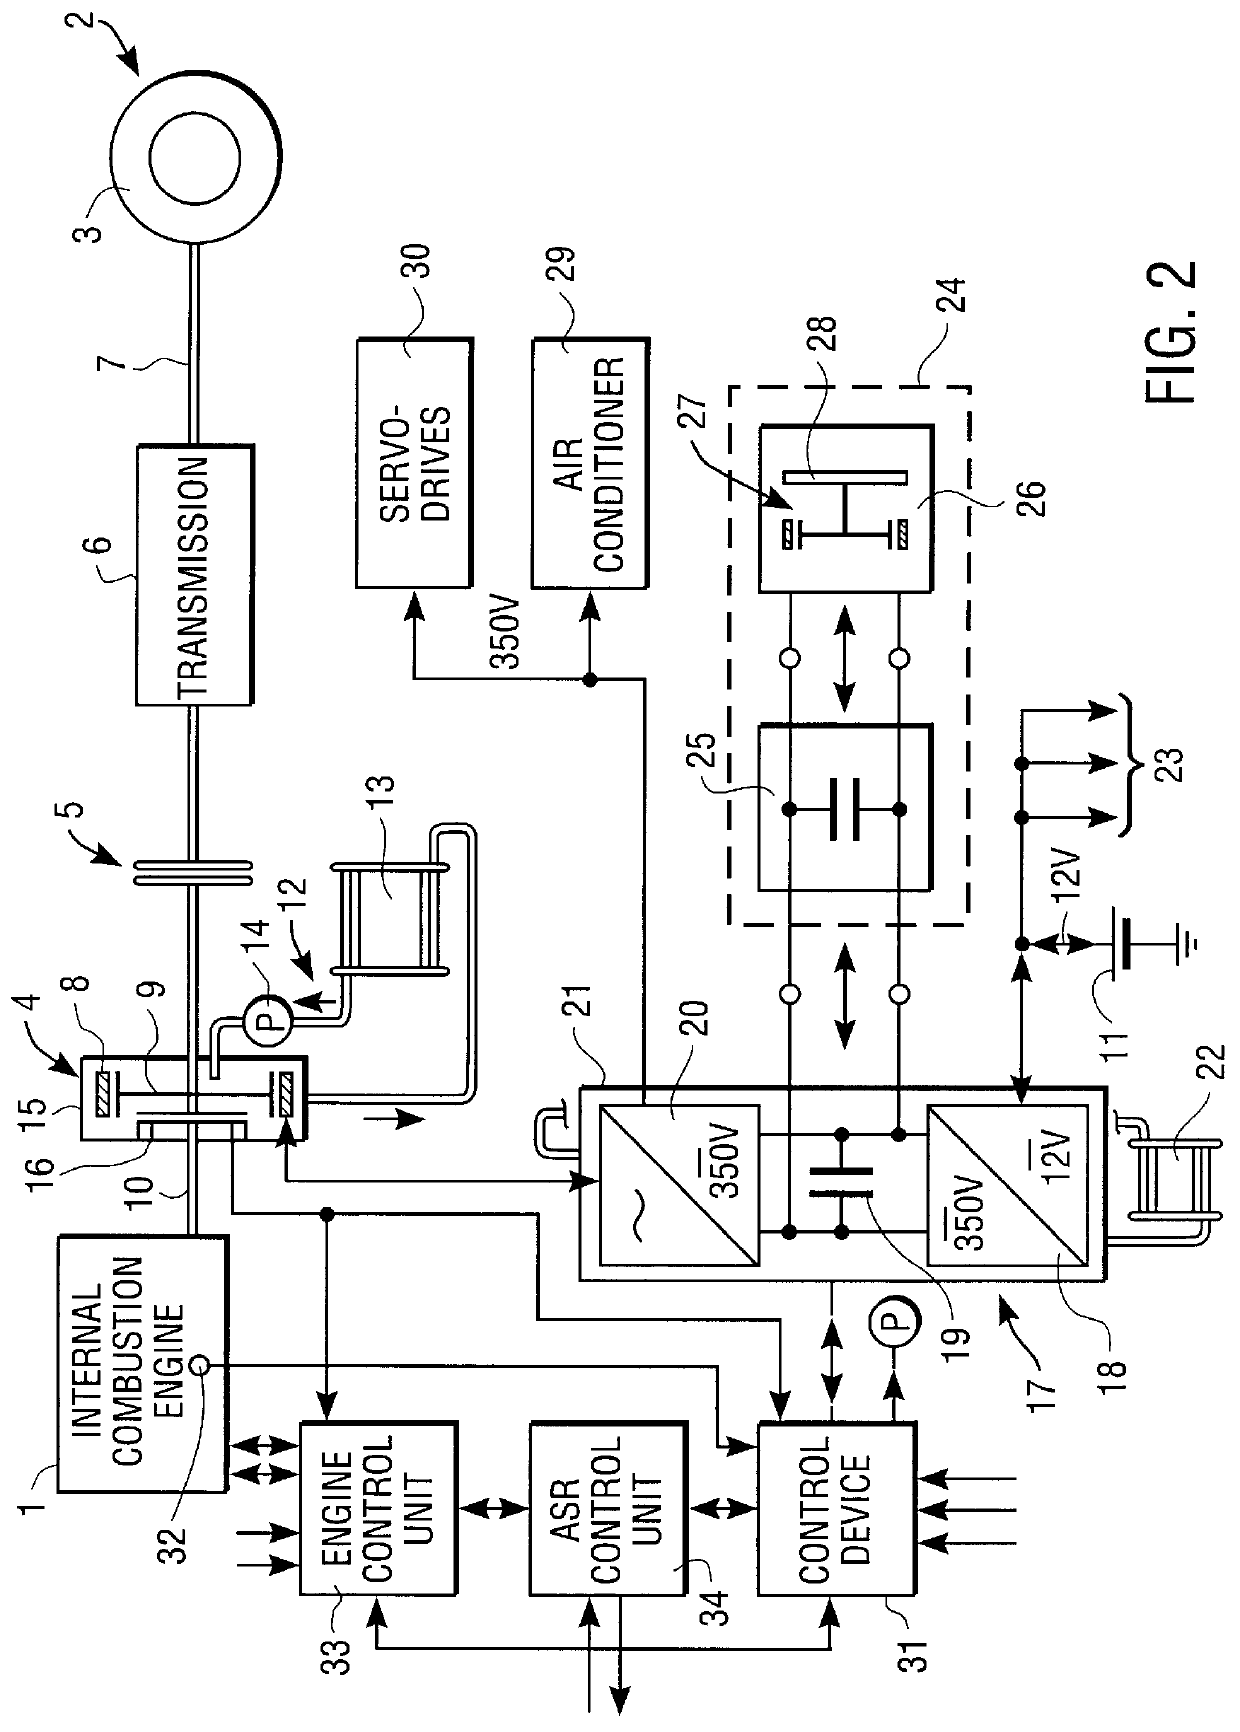 Drive systems, especially for a motor vehicle, and method of operating same